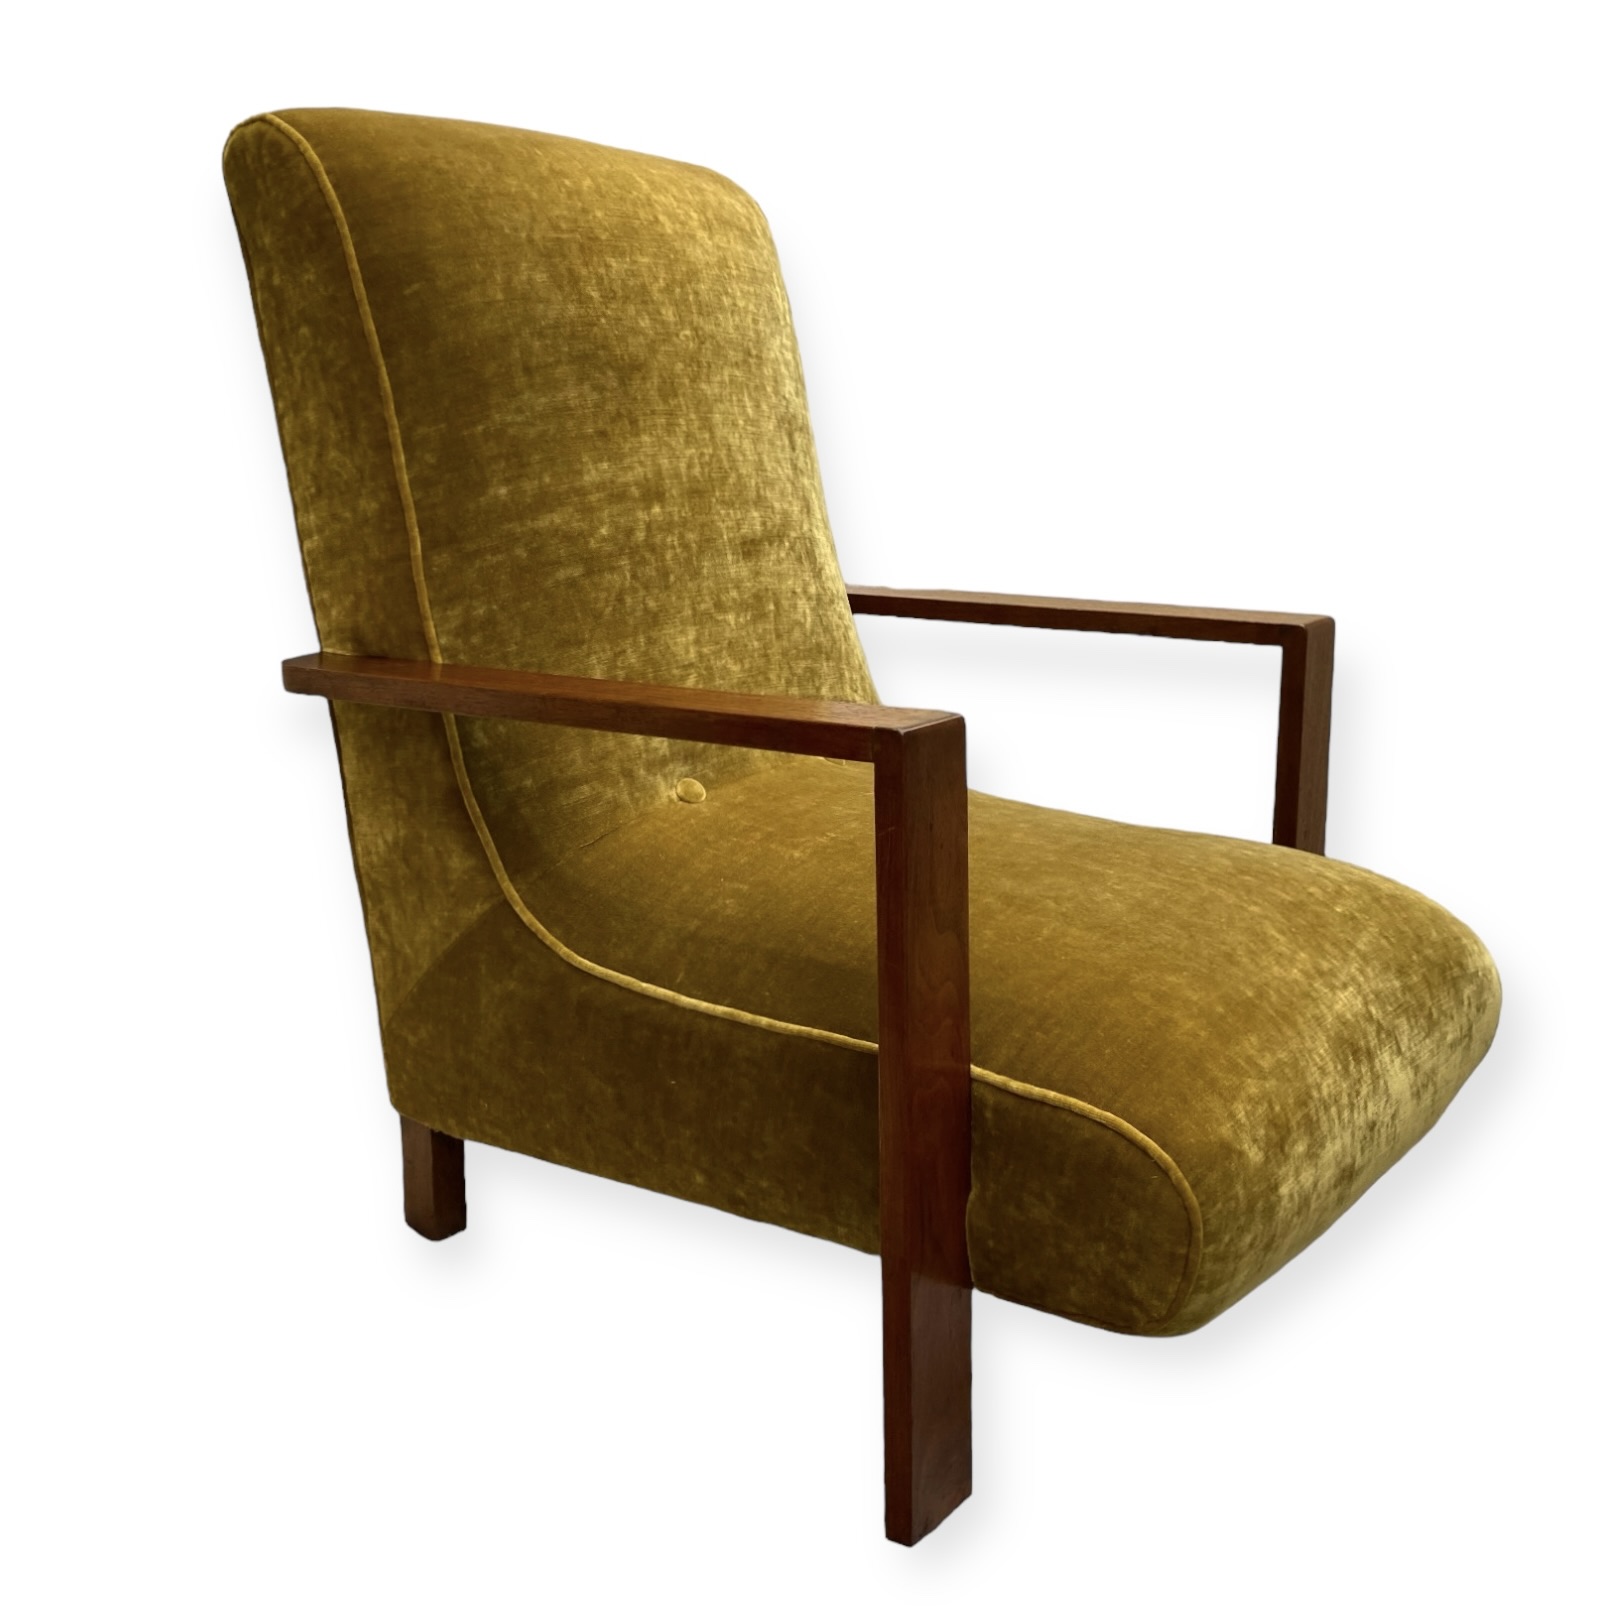 Modernist Cotswold School Style Dovetail Walnut Armchair By Heals Of London Fully Restored And Upholstered In Luxurious Linwood Velvet